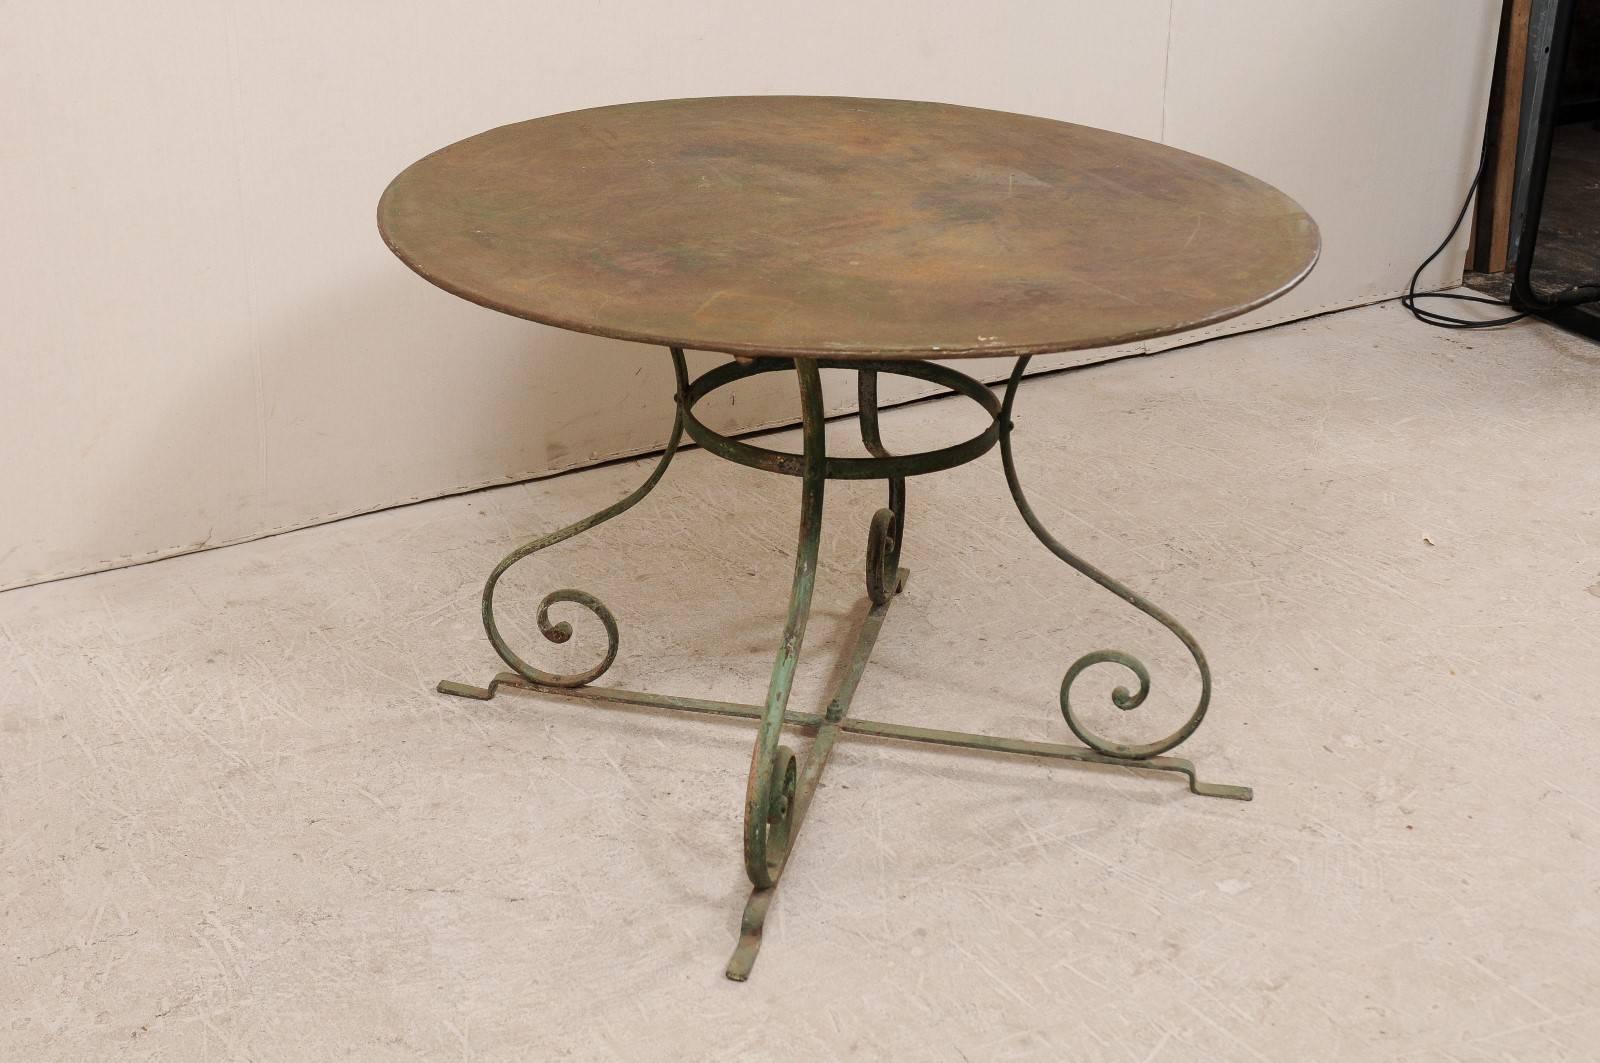 Metal French Mid-20th Century Round Patio Dining Table with Scrolled Legs and Patina